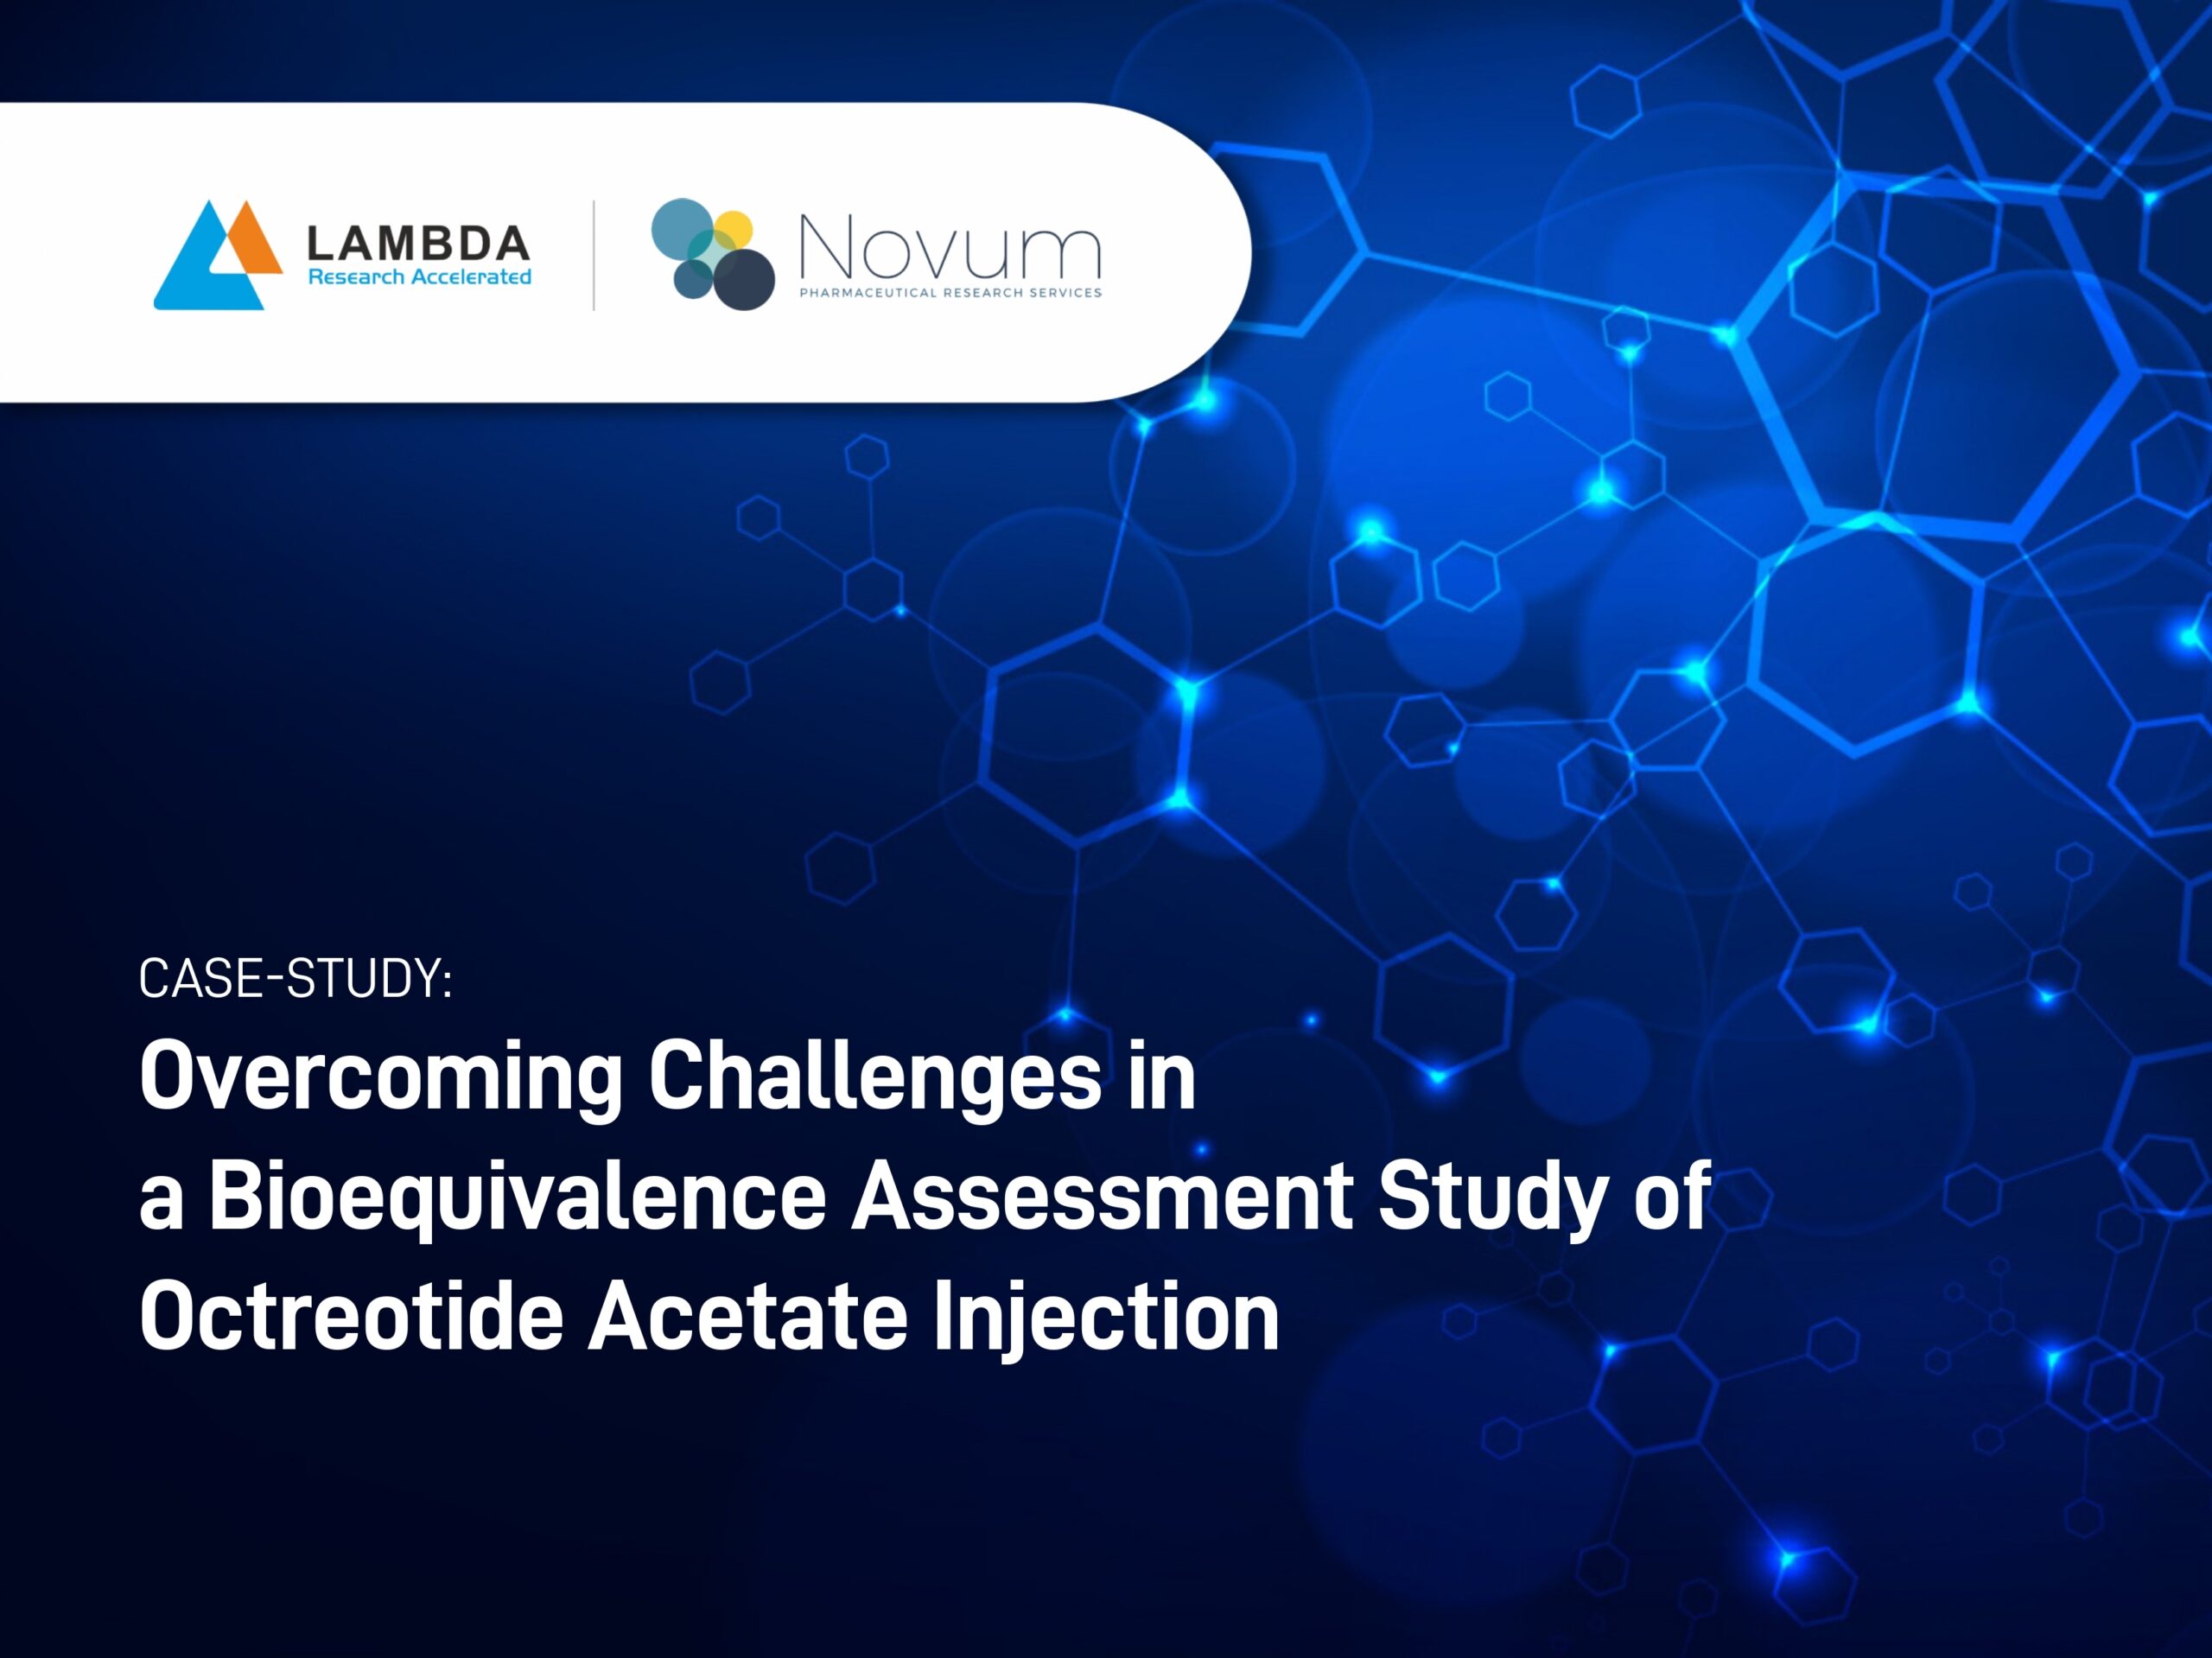 Overcoming Challenges in a Bioequivalence Assessment Study of Octreotide Acetate Injection